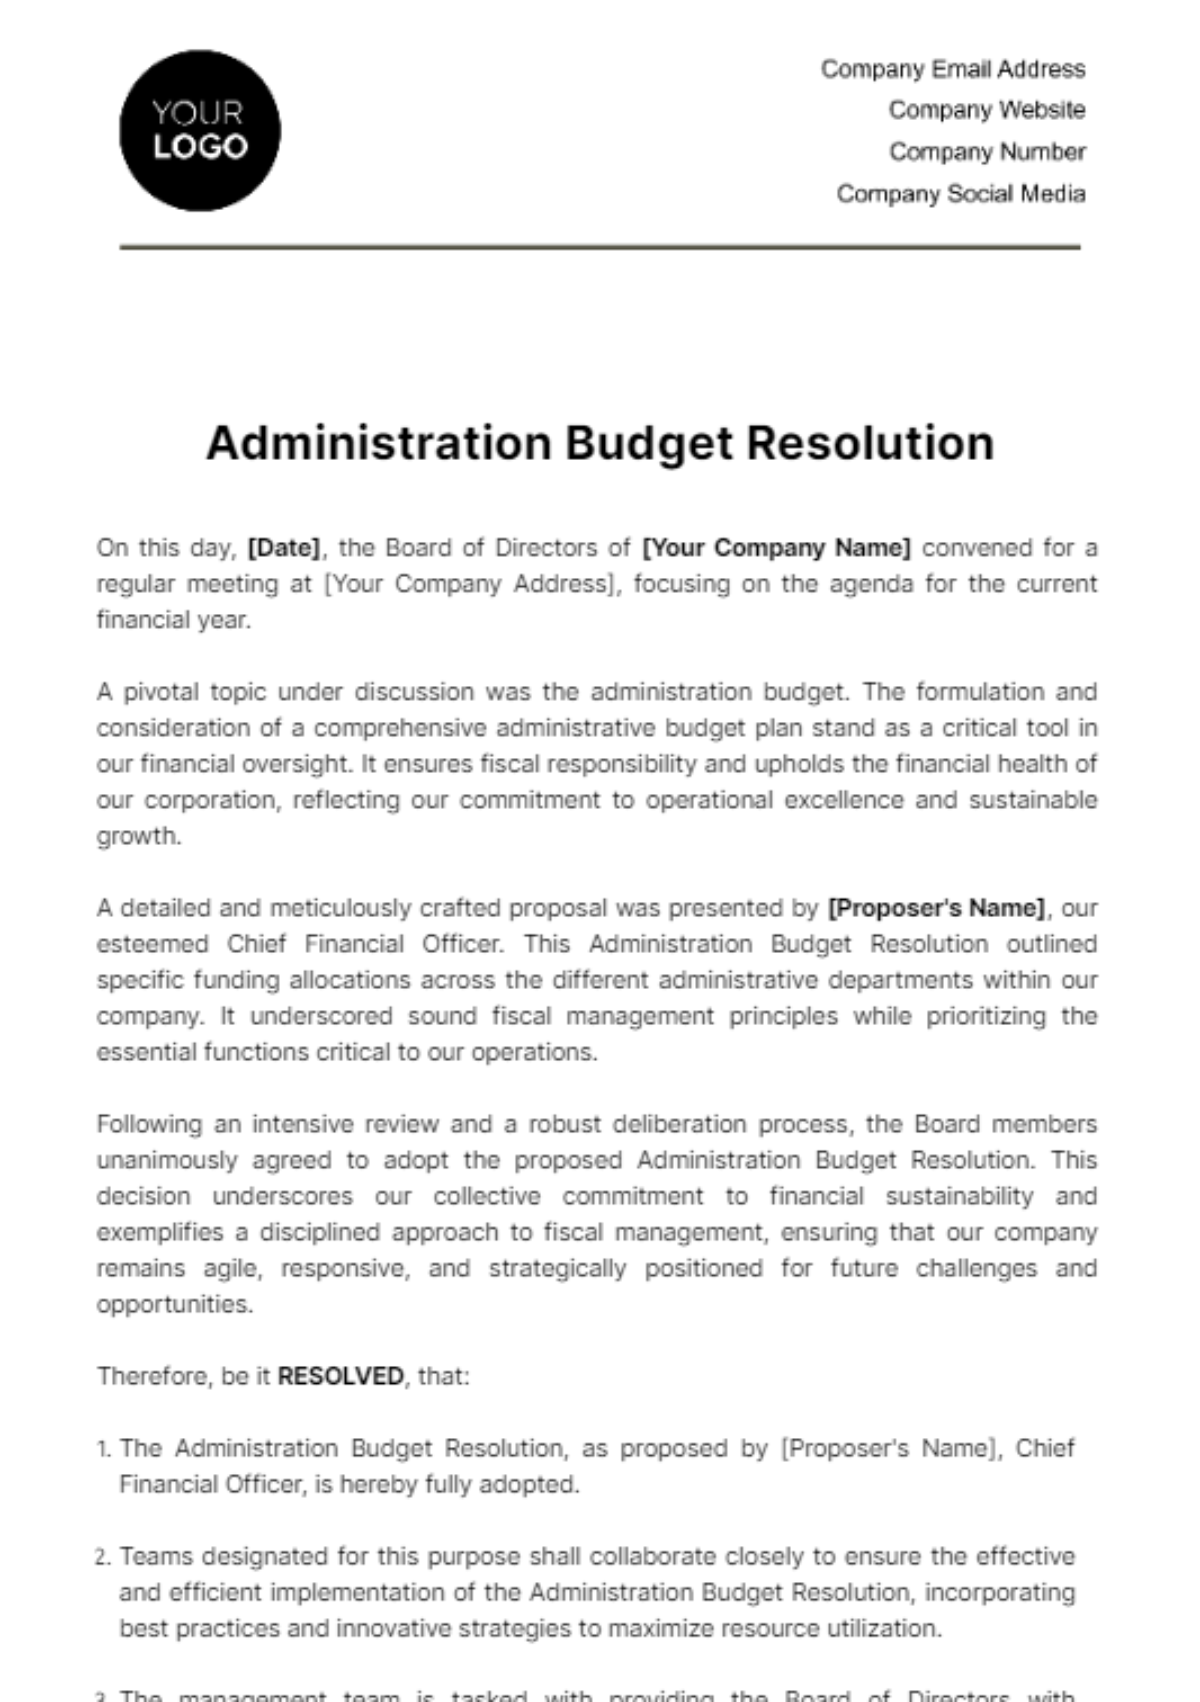 Administration Budget Resolution Template